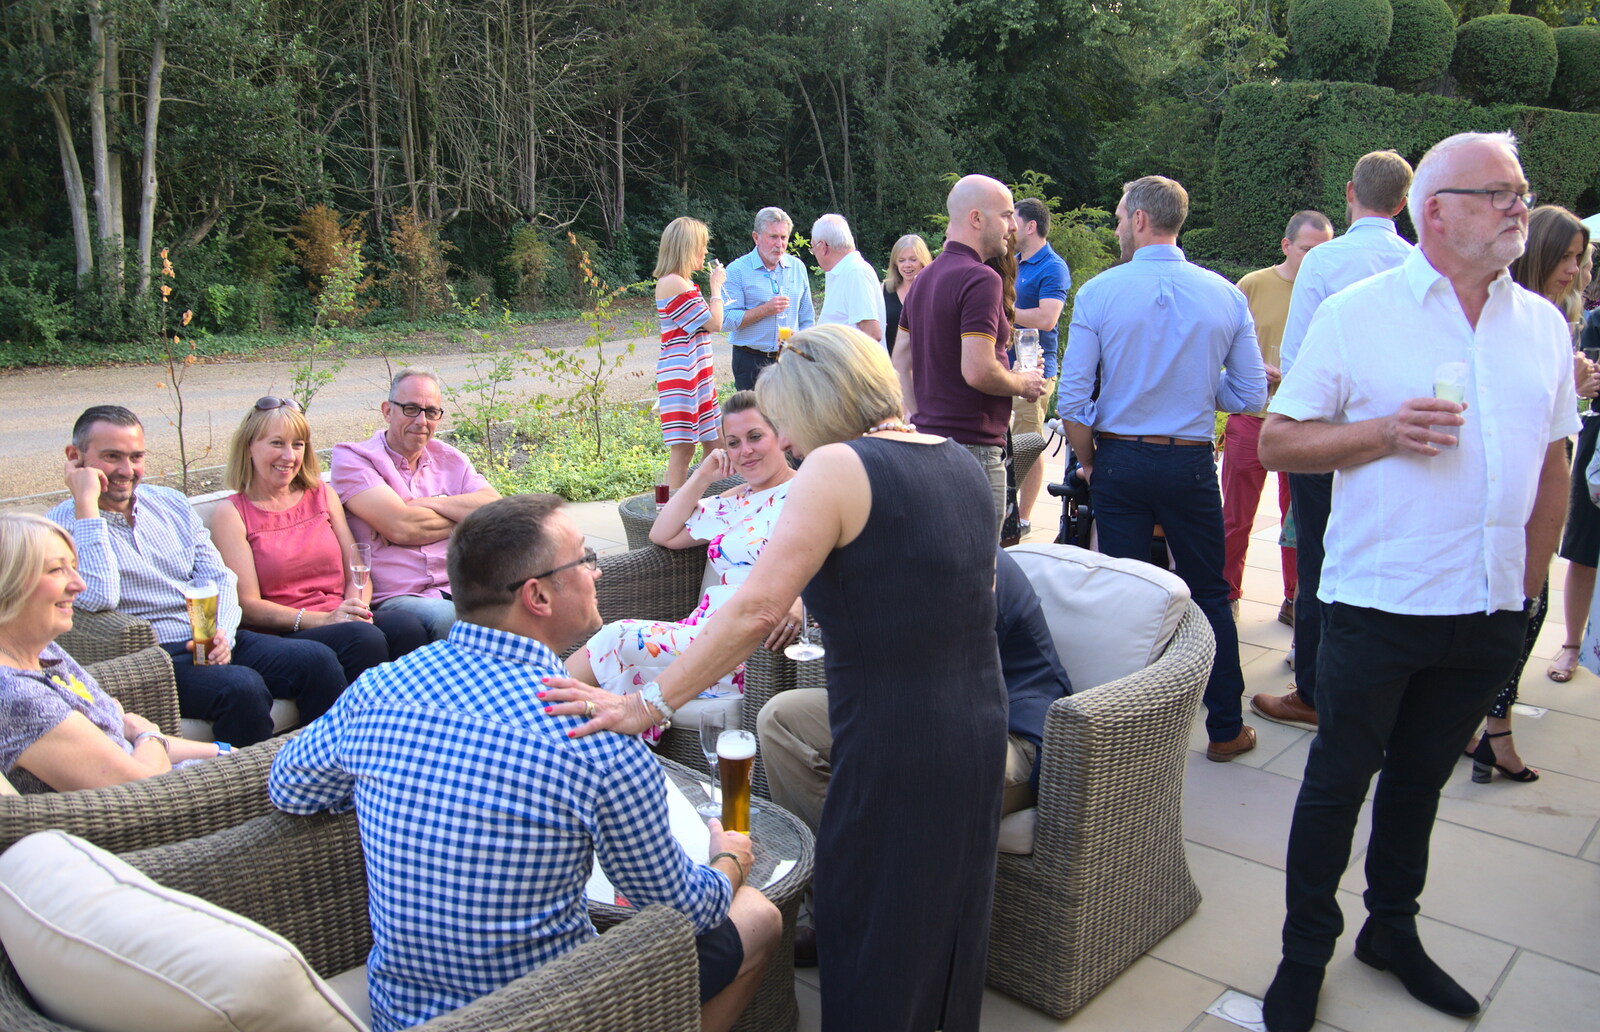 Patio party from An Oaksmere Party, Brome, Suffolk - 14th July 2018